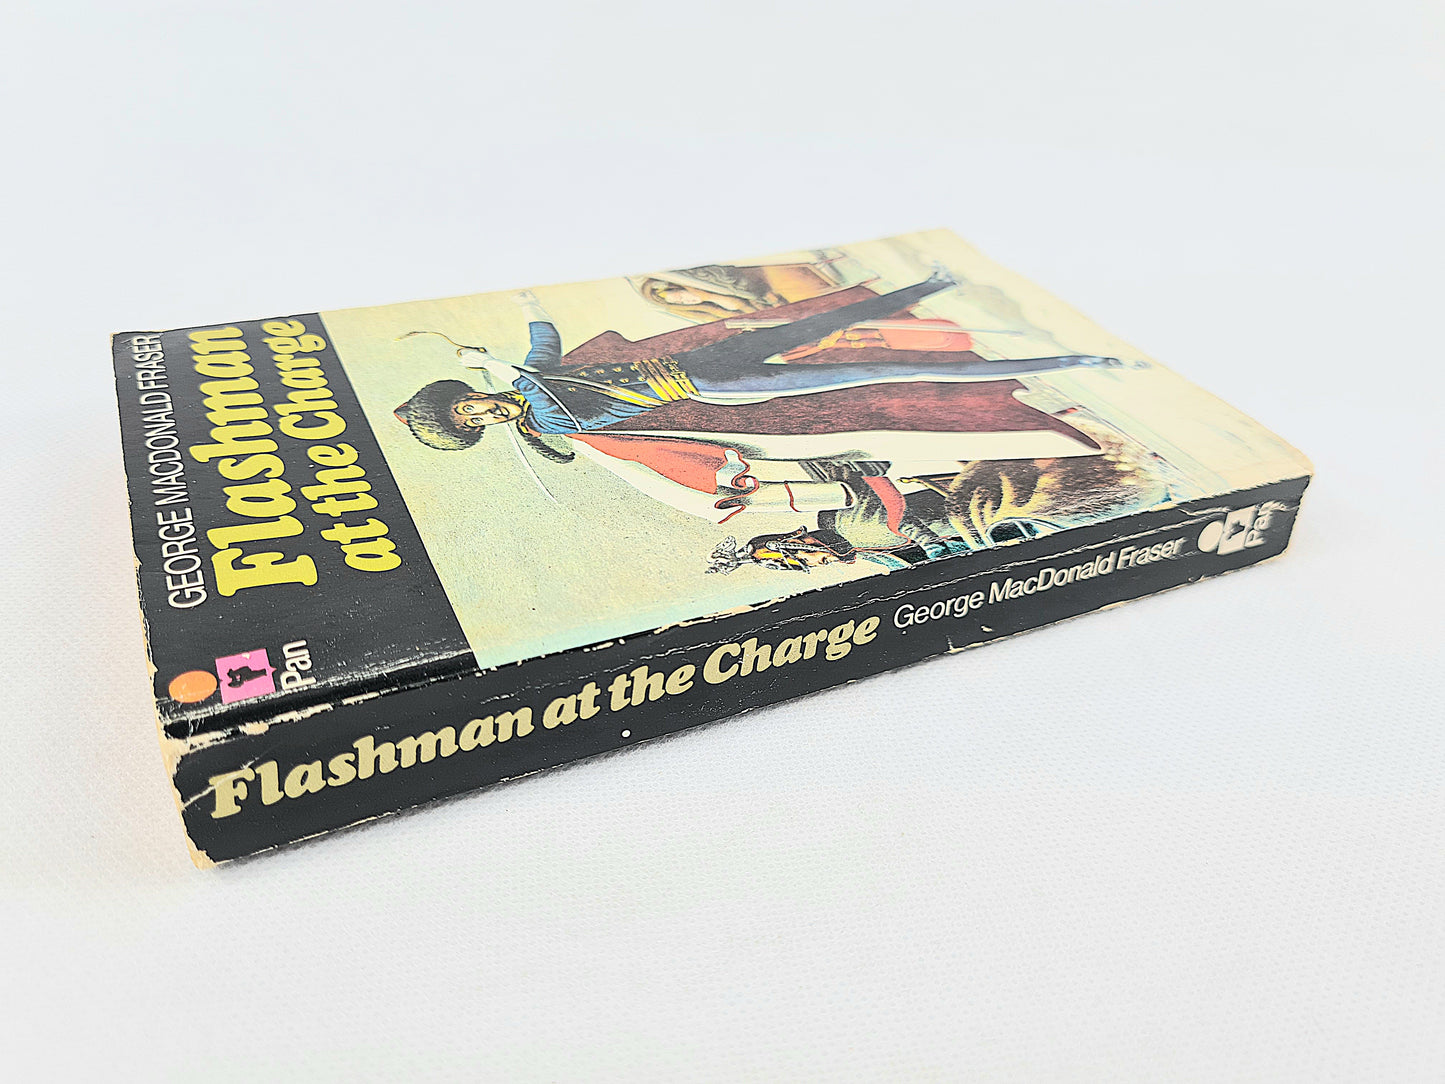 Flashman At The Charge by George Macdonald Fraser. Vintage paperback. Pan books